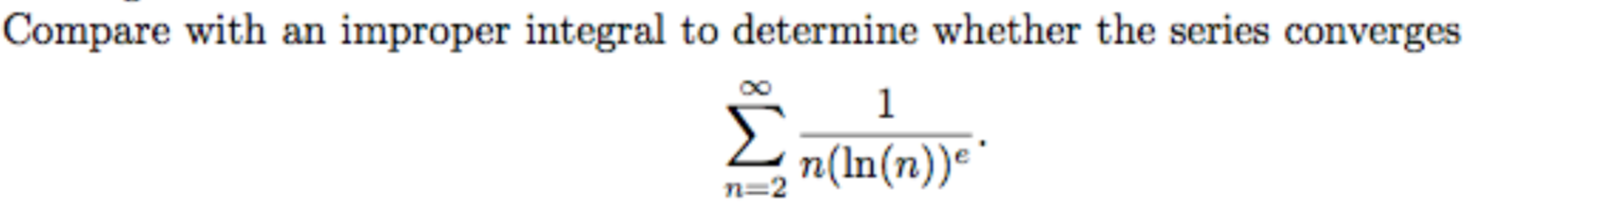 Compare with an improper integral to determine whether the series converges
ΣΤΕΥ
n(In(n))e
